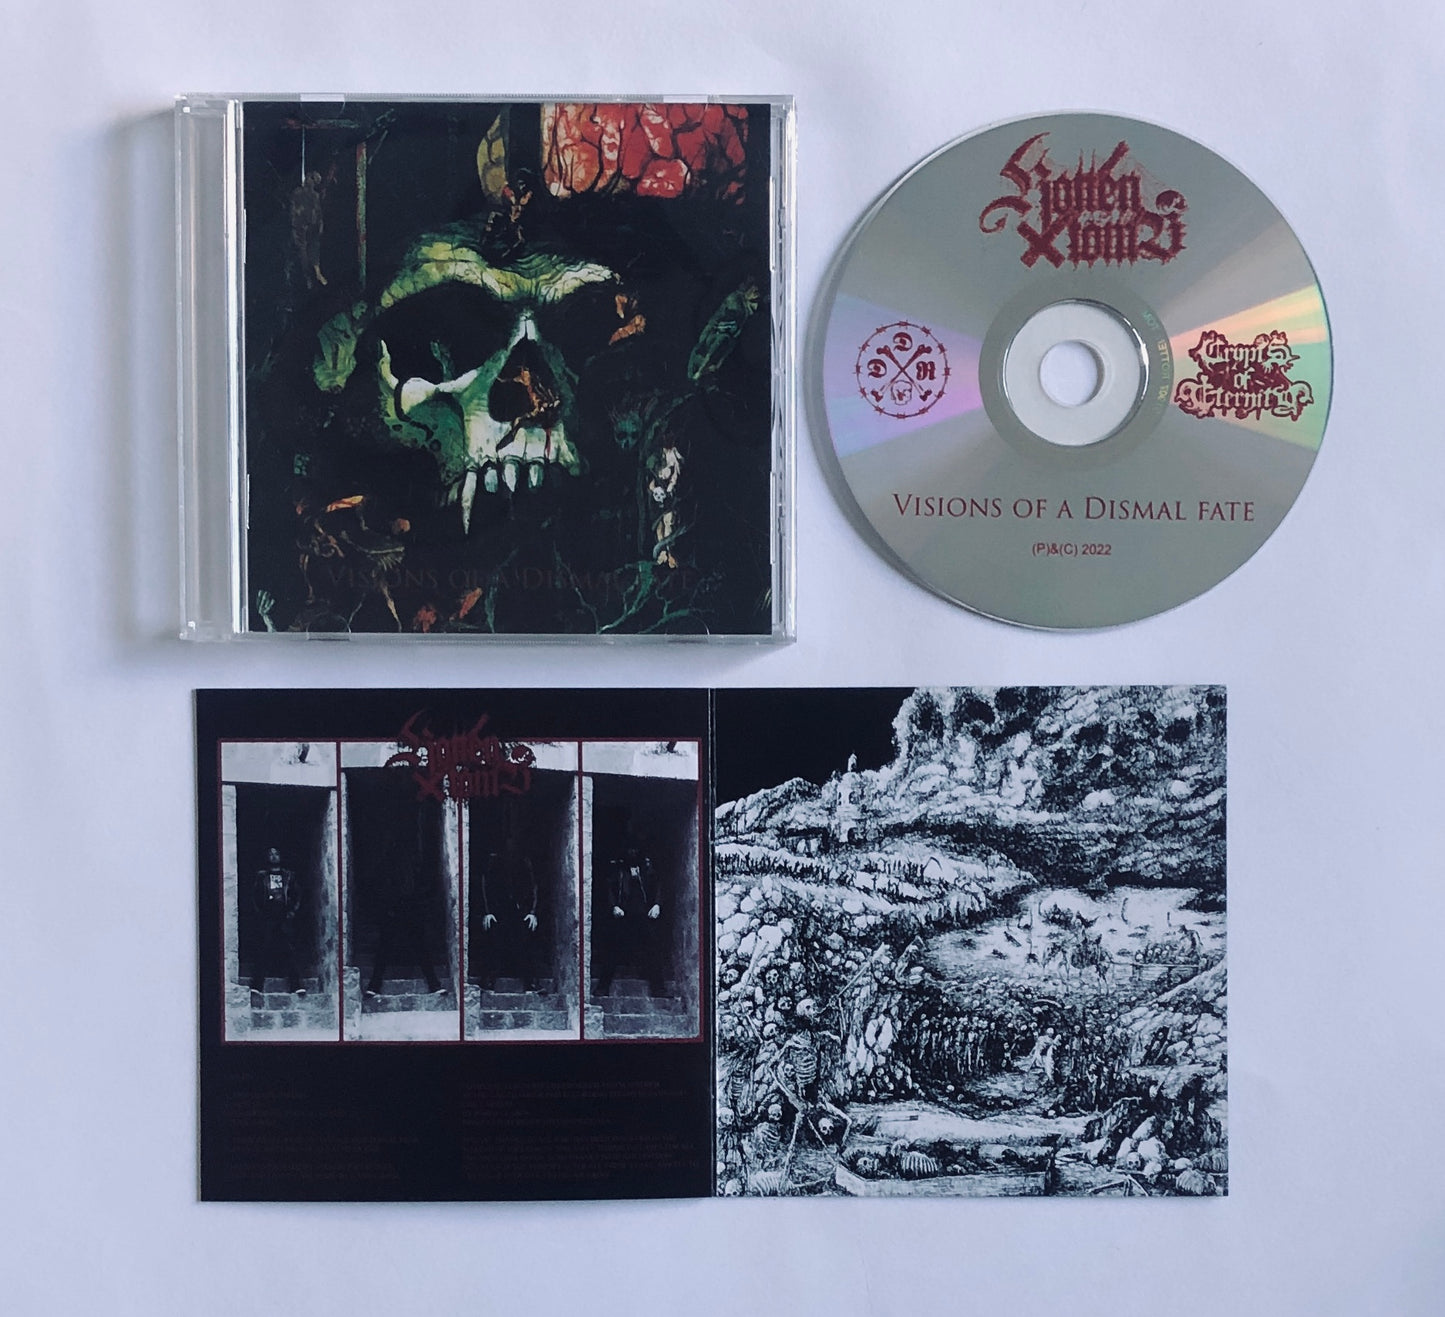 Rottent Tomb (Chile) "Visions of Dismal Fate"- CDs